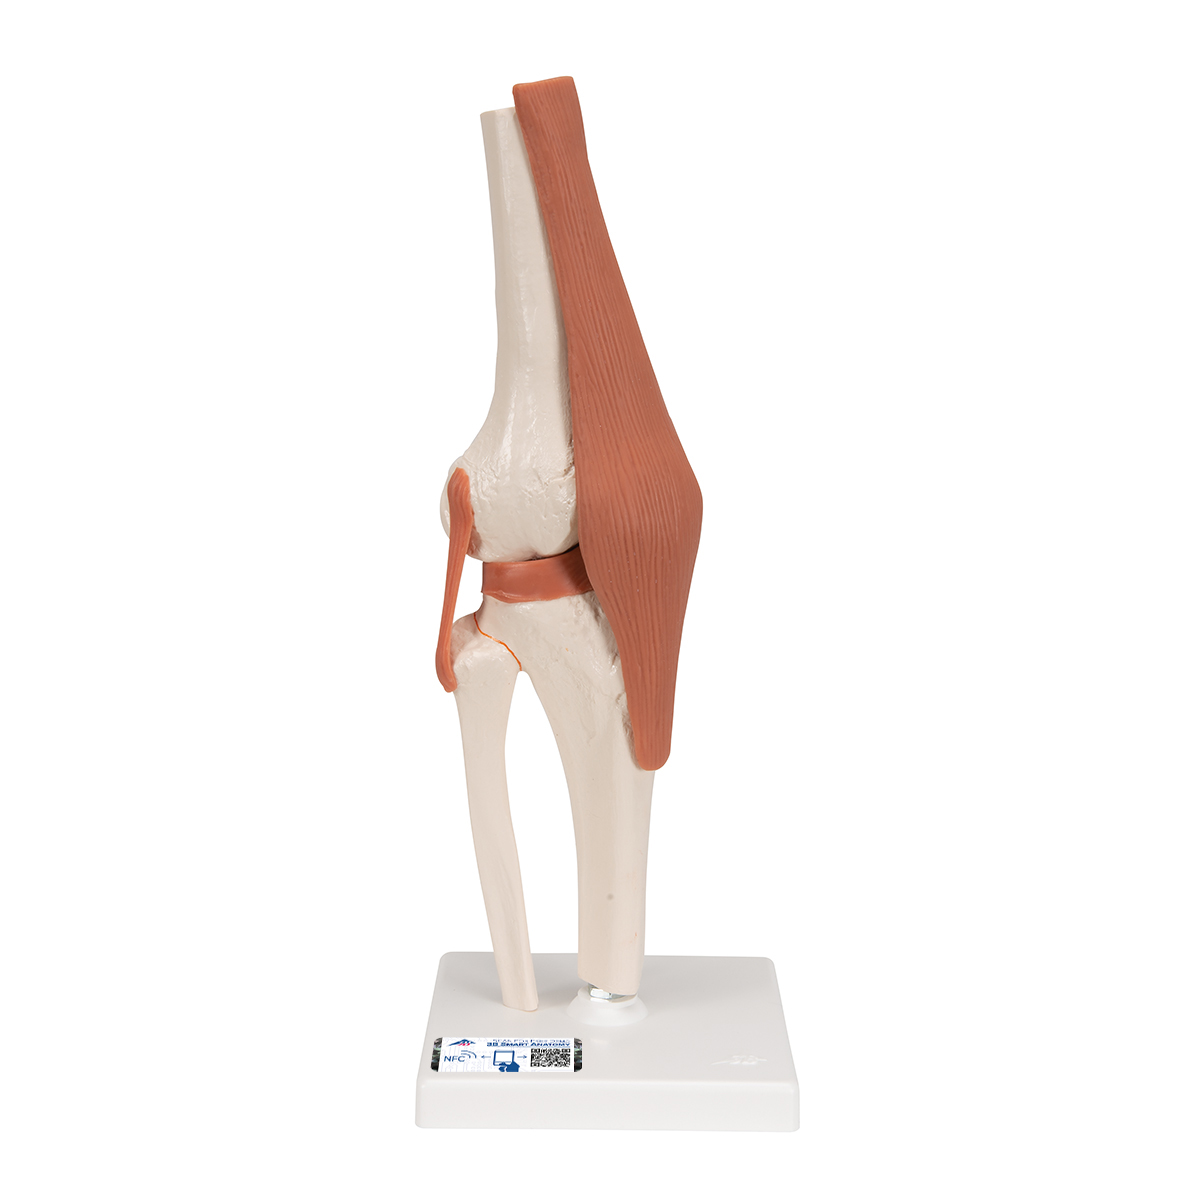 Human Anatomy Knee Joint Kits Showing Soft Tissues for Medical Study Model